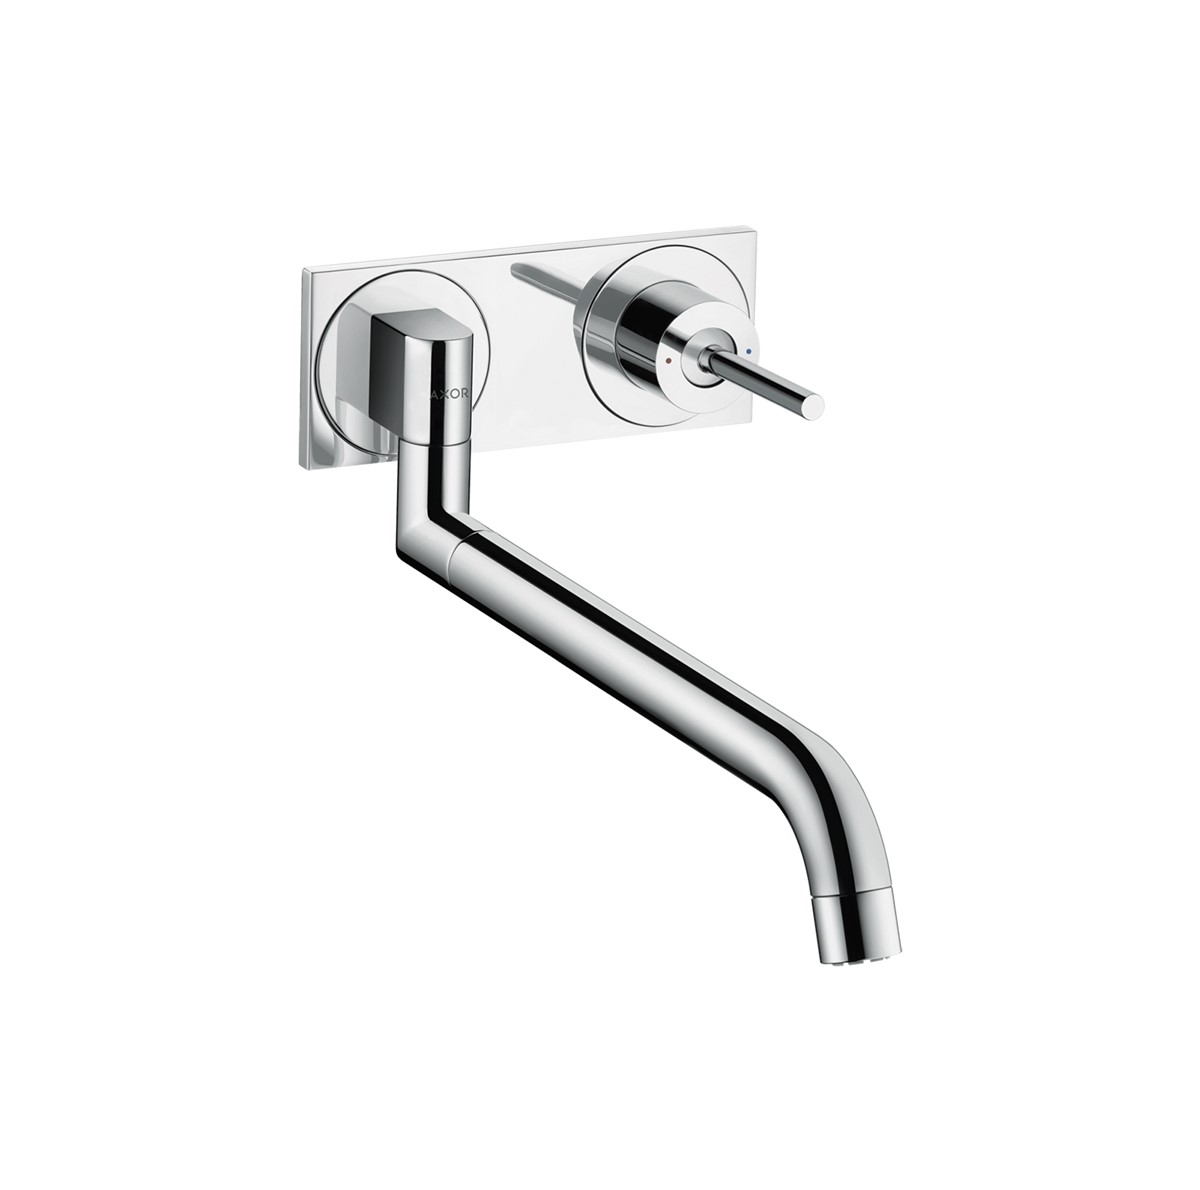 Hansgrohe-Phoenix-Design-AXOR-Uno-Kitchen-Mixer-Concealed-Wall-Mounted-38815000-Matisse-1